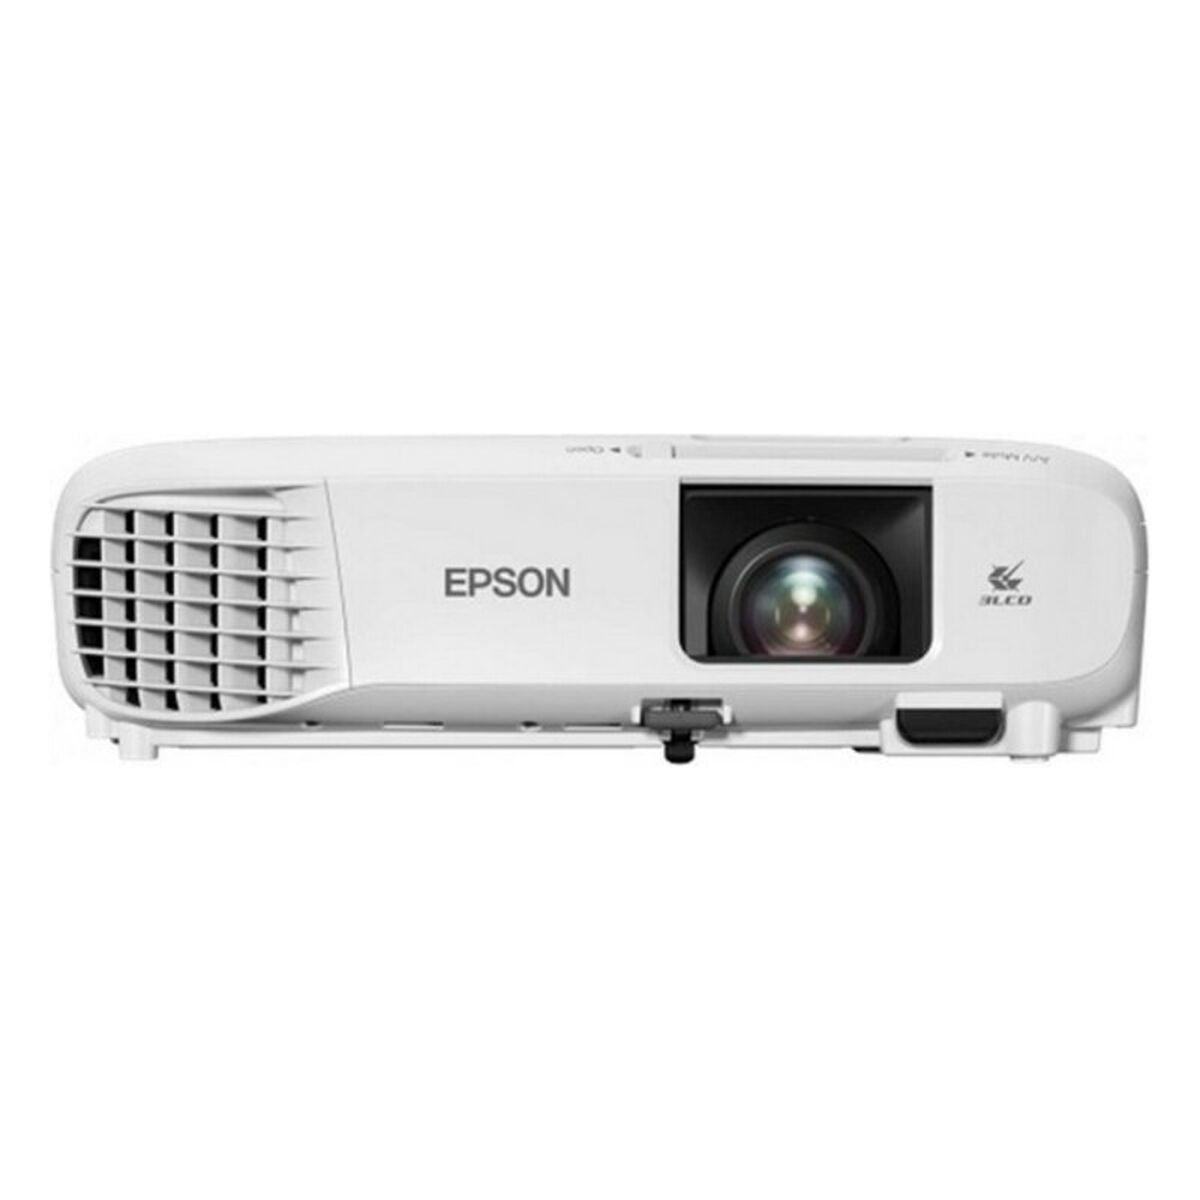 Projector Epson V11H983040 WXGA 3800 lm White 1080 px, Epson, Electronics, TV, Video and home cinema, projector-epson-v11h983040-wxga-3800-lm-white-1080-px, Brand_Epson, category-reference-2609, category-reference-2642, category-reference-2947, category-reference-t-18805, category-reference-t-19653, cinema and television, computers / peripherals, Condition_NEW, entertainment, office, Price_600 - 700, RiotNook